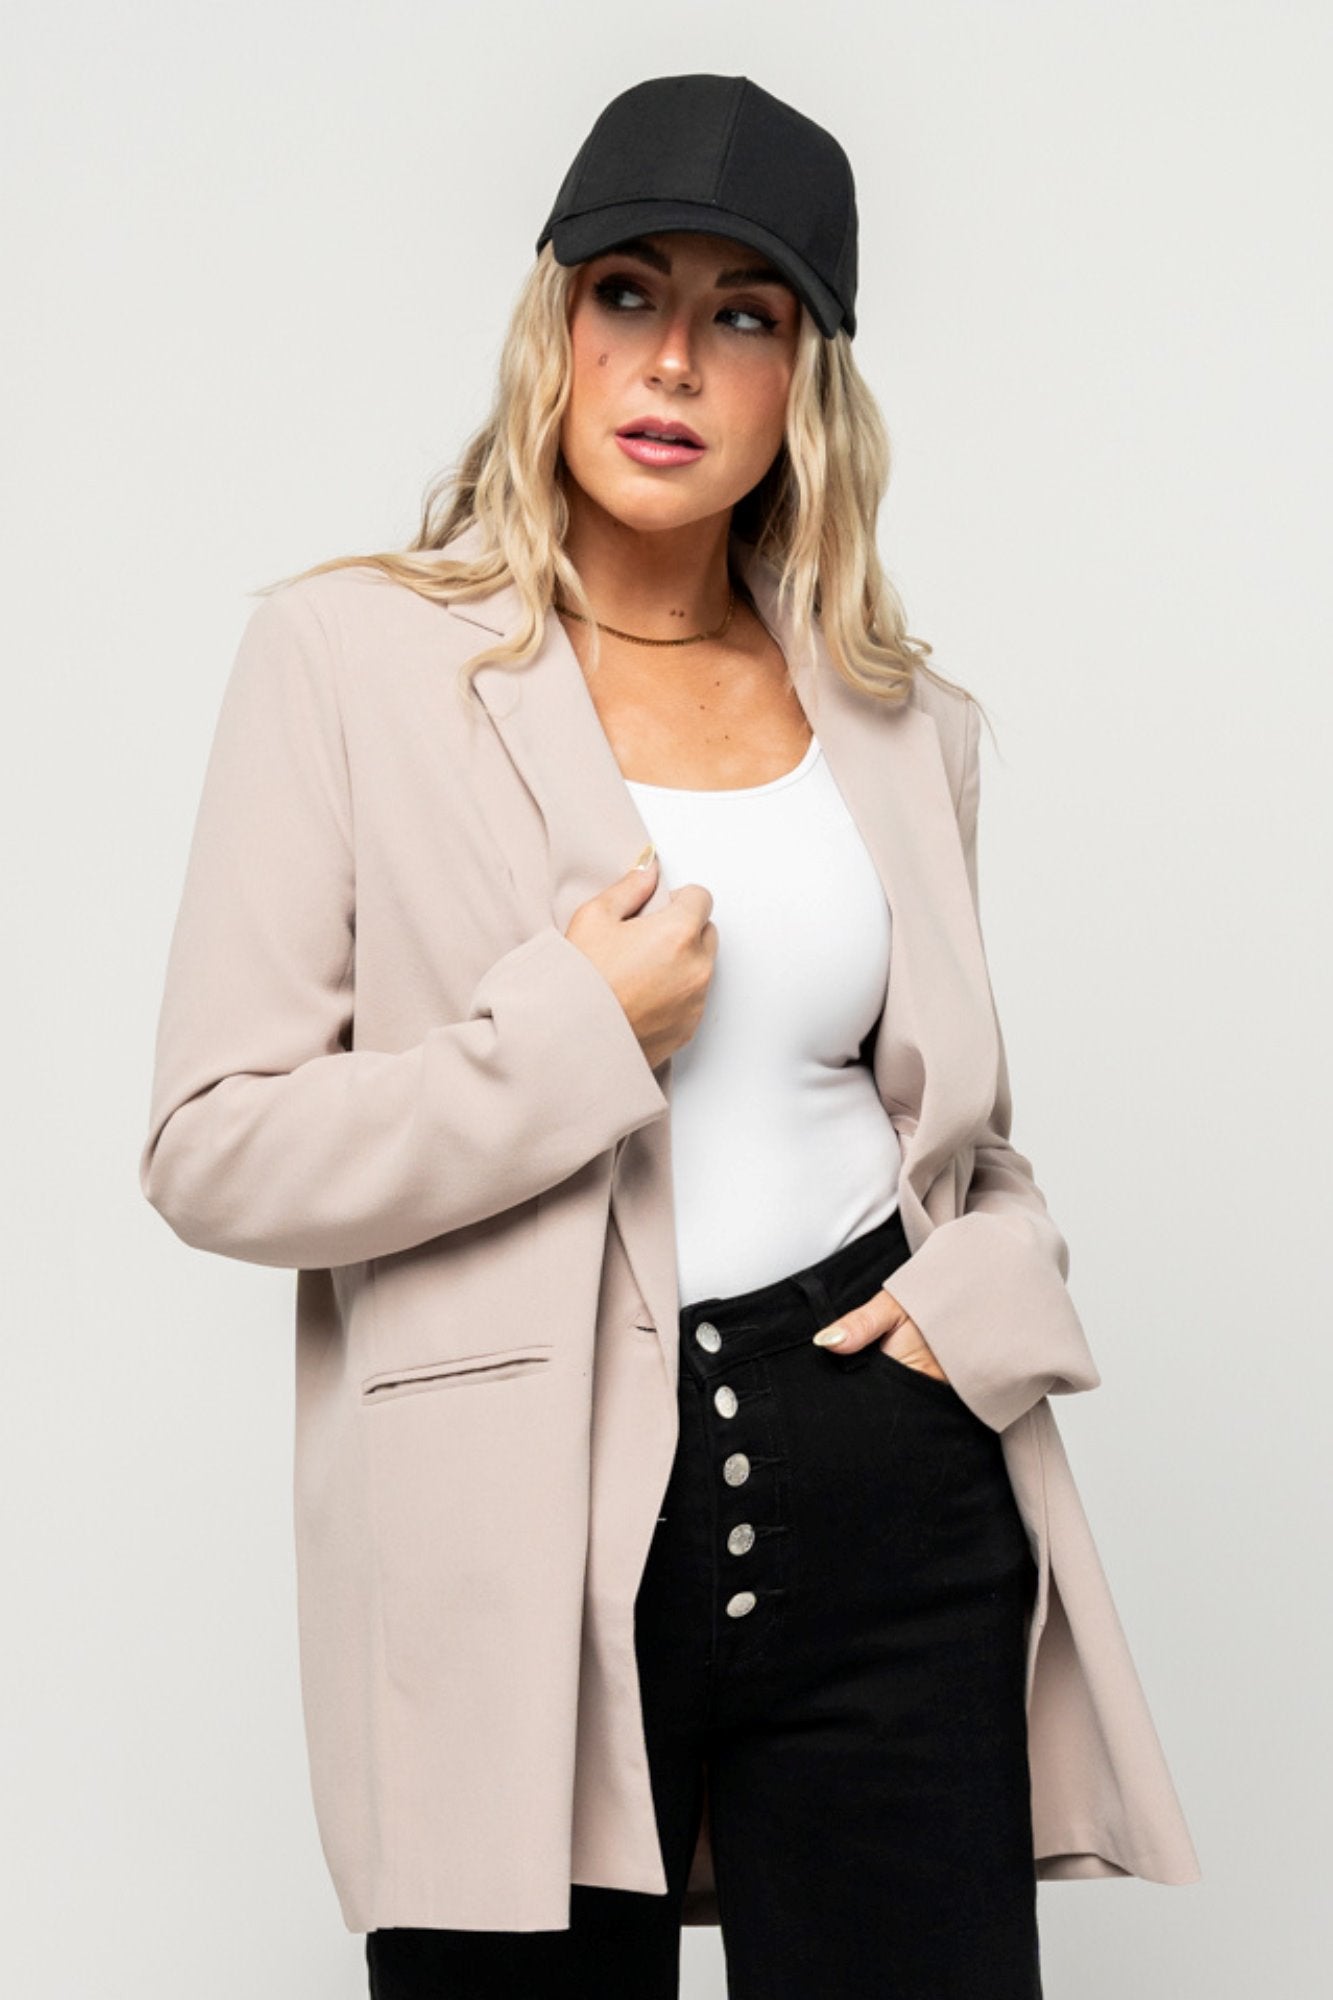 Dallas Blazer in Taupe Holley Girl 